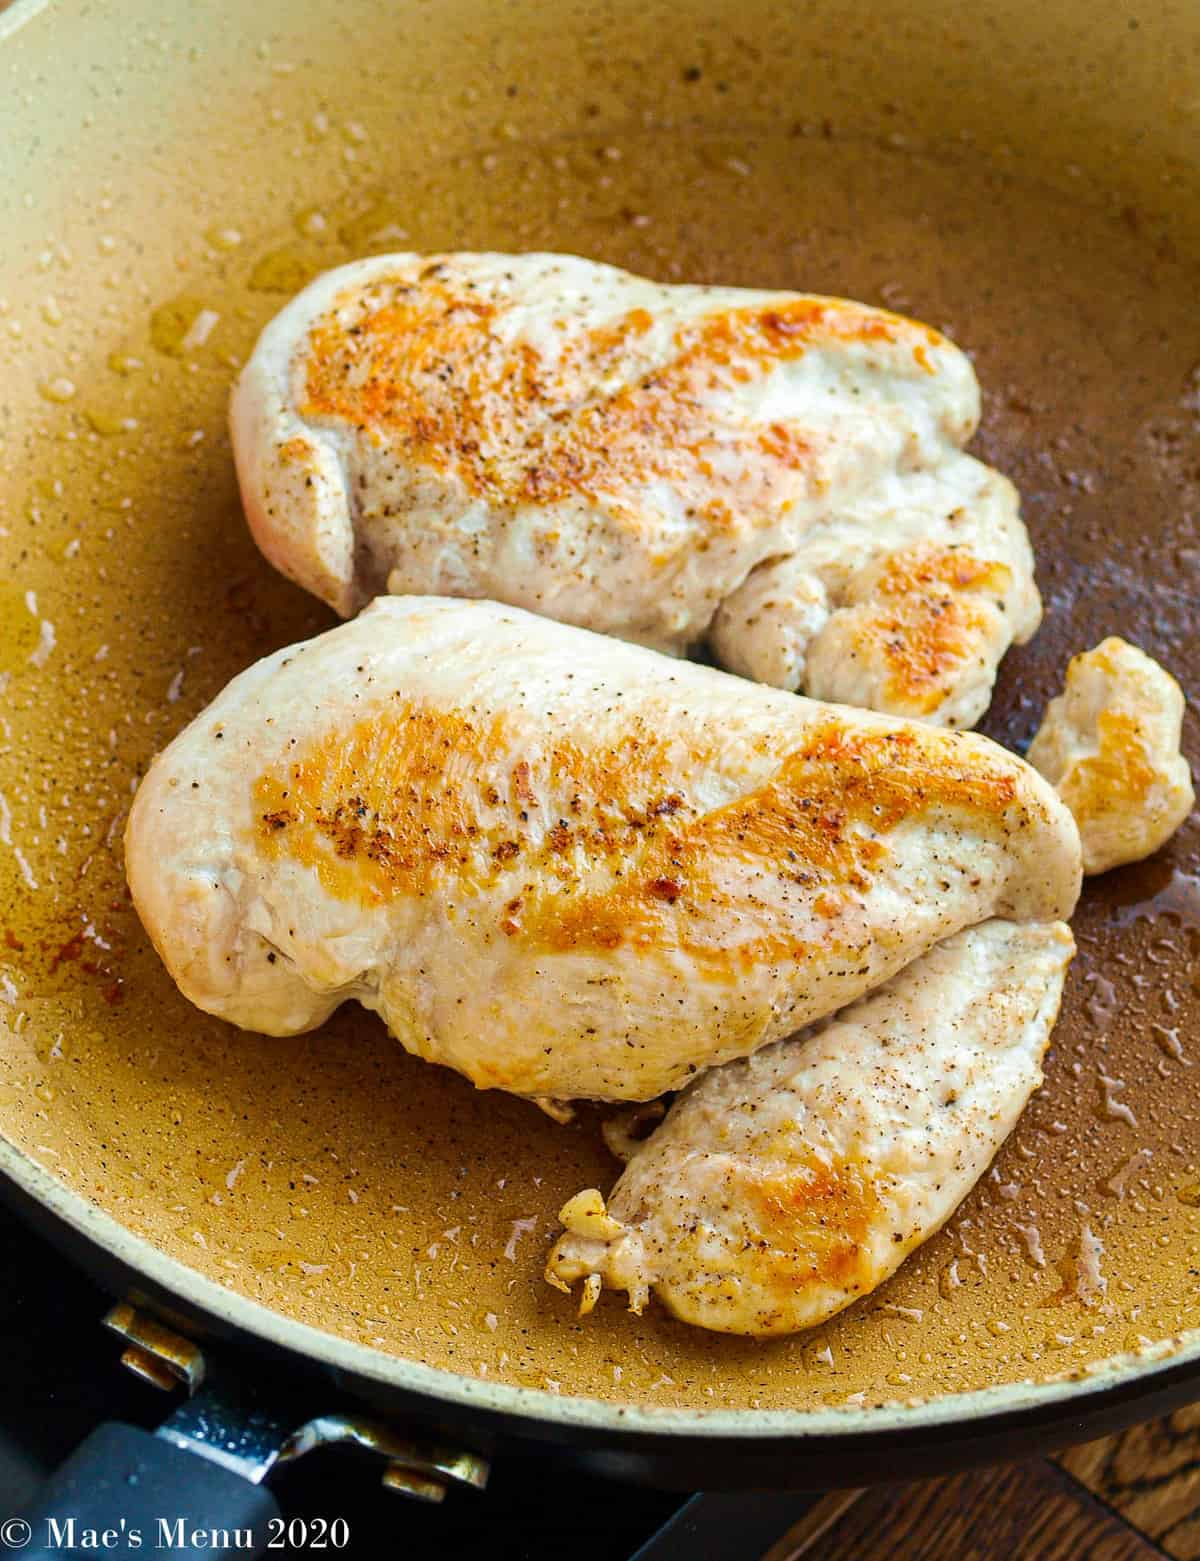 Two chicken breasts in a saute pan